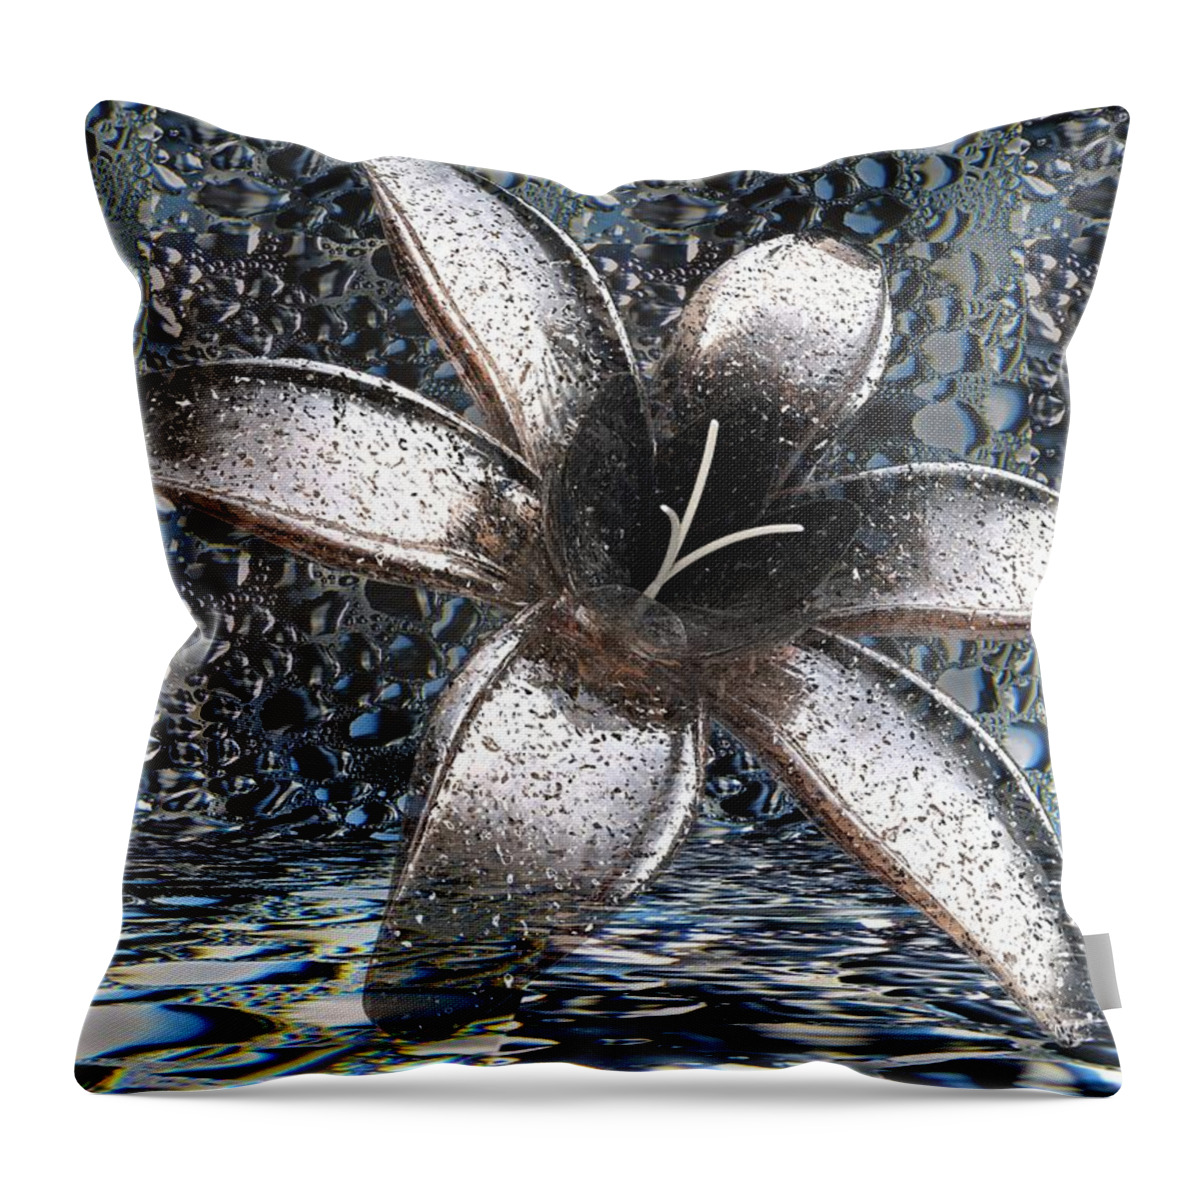 Flowers Throw Pillow featuring the digital art April Showers by Louis Ferreira